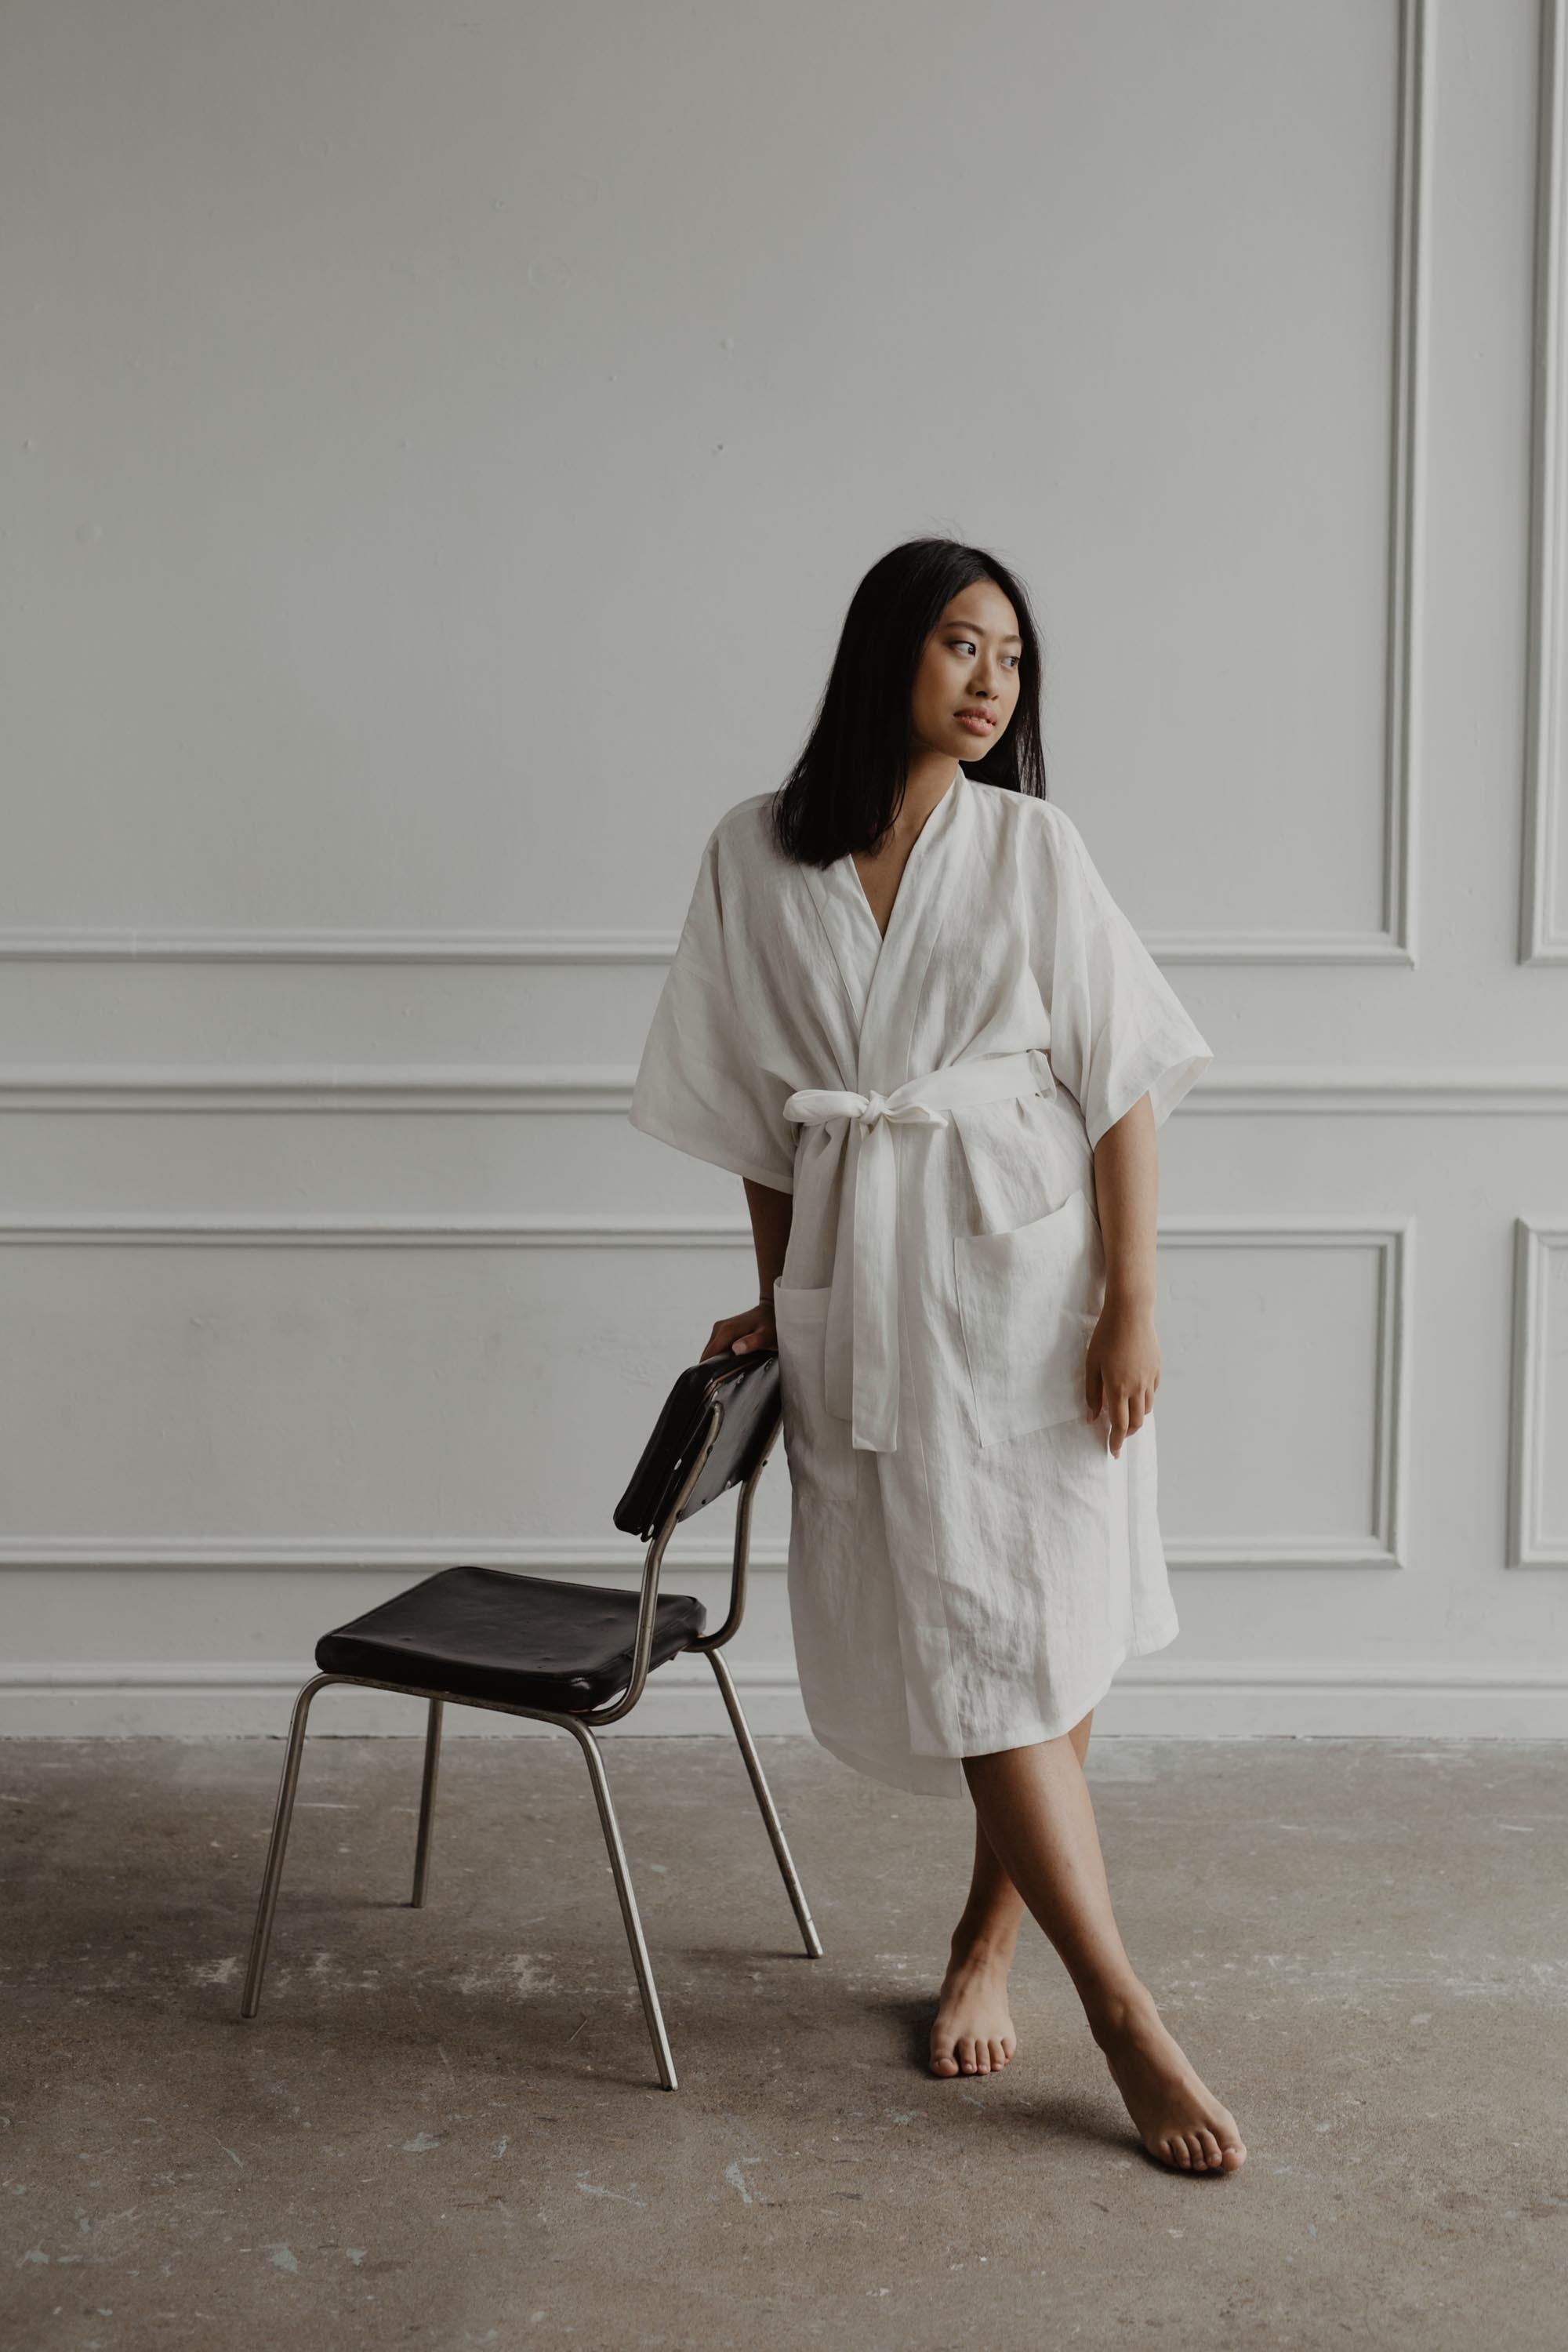 Woman Leaning On Chair Wearing A White Linen Bathrobe By AmourLinen